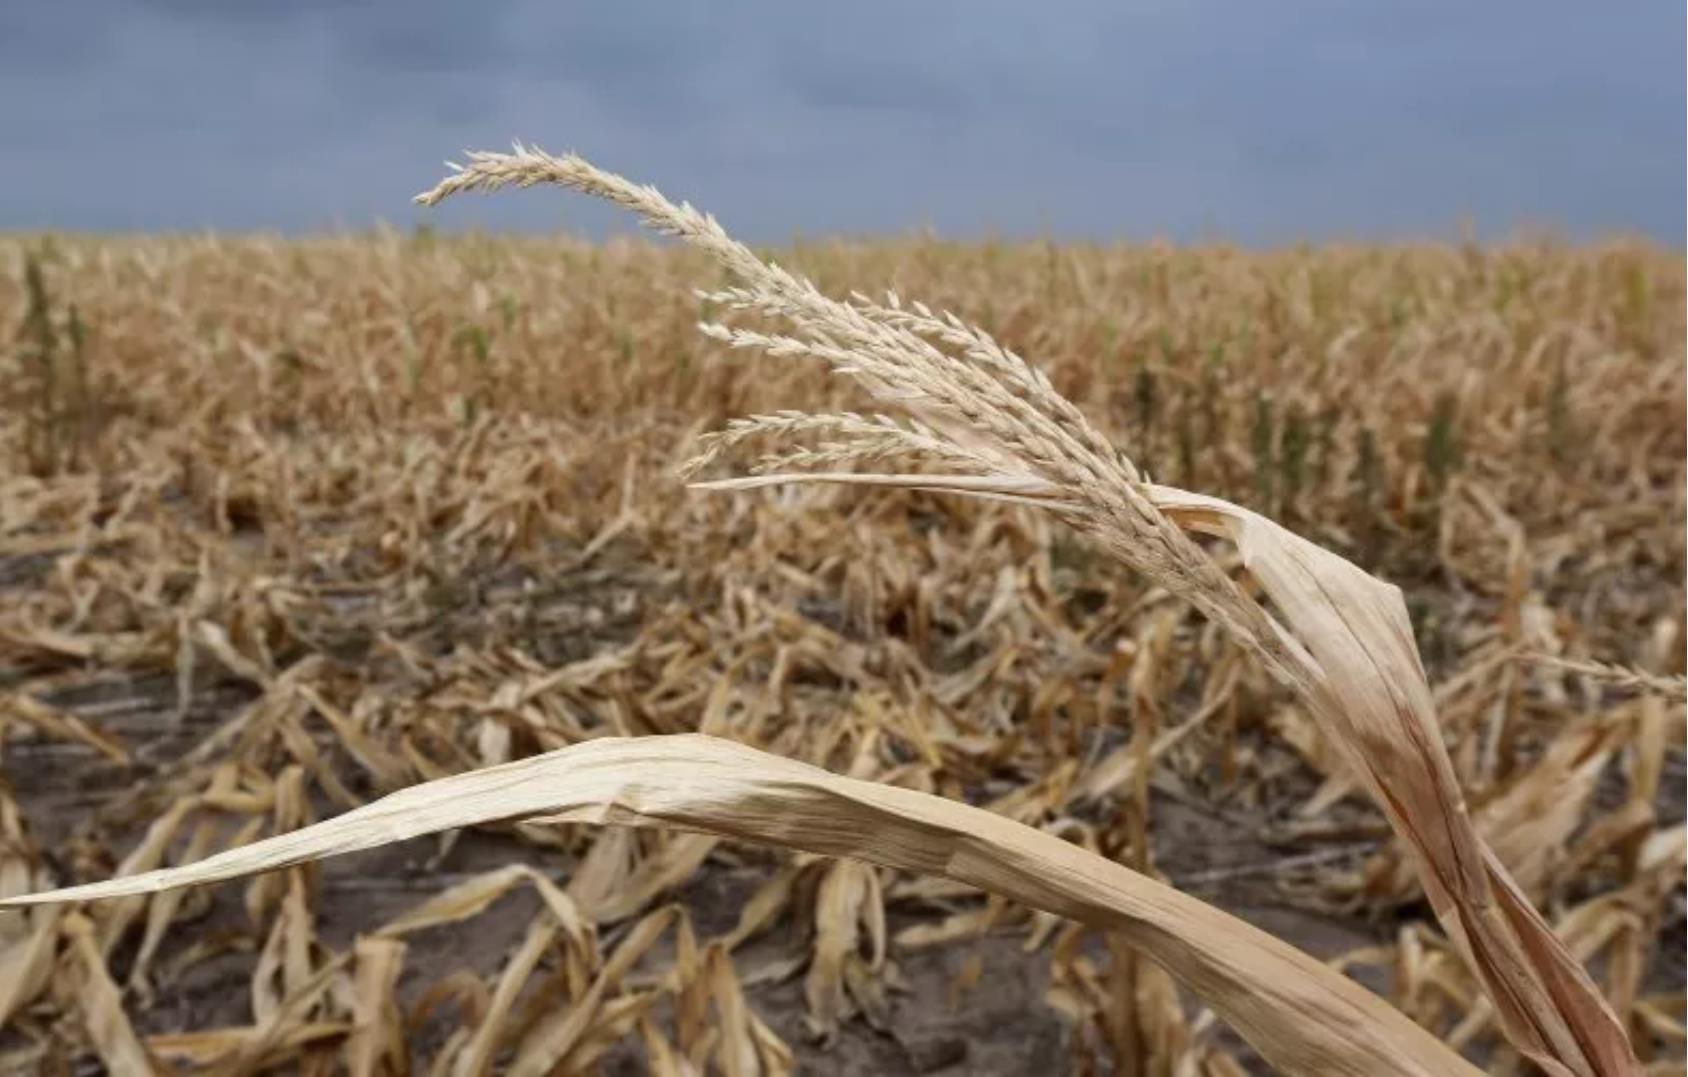 U.S. Wheat Supply Threatened as Worst Drought in Decade Scorches Kansas